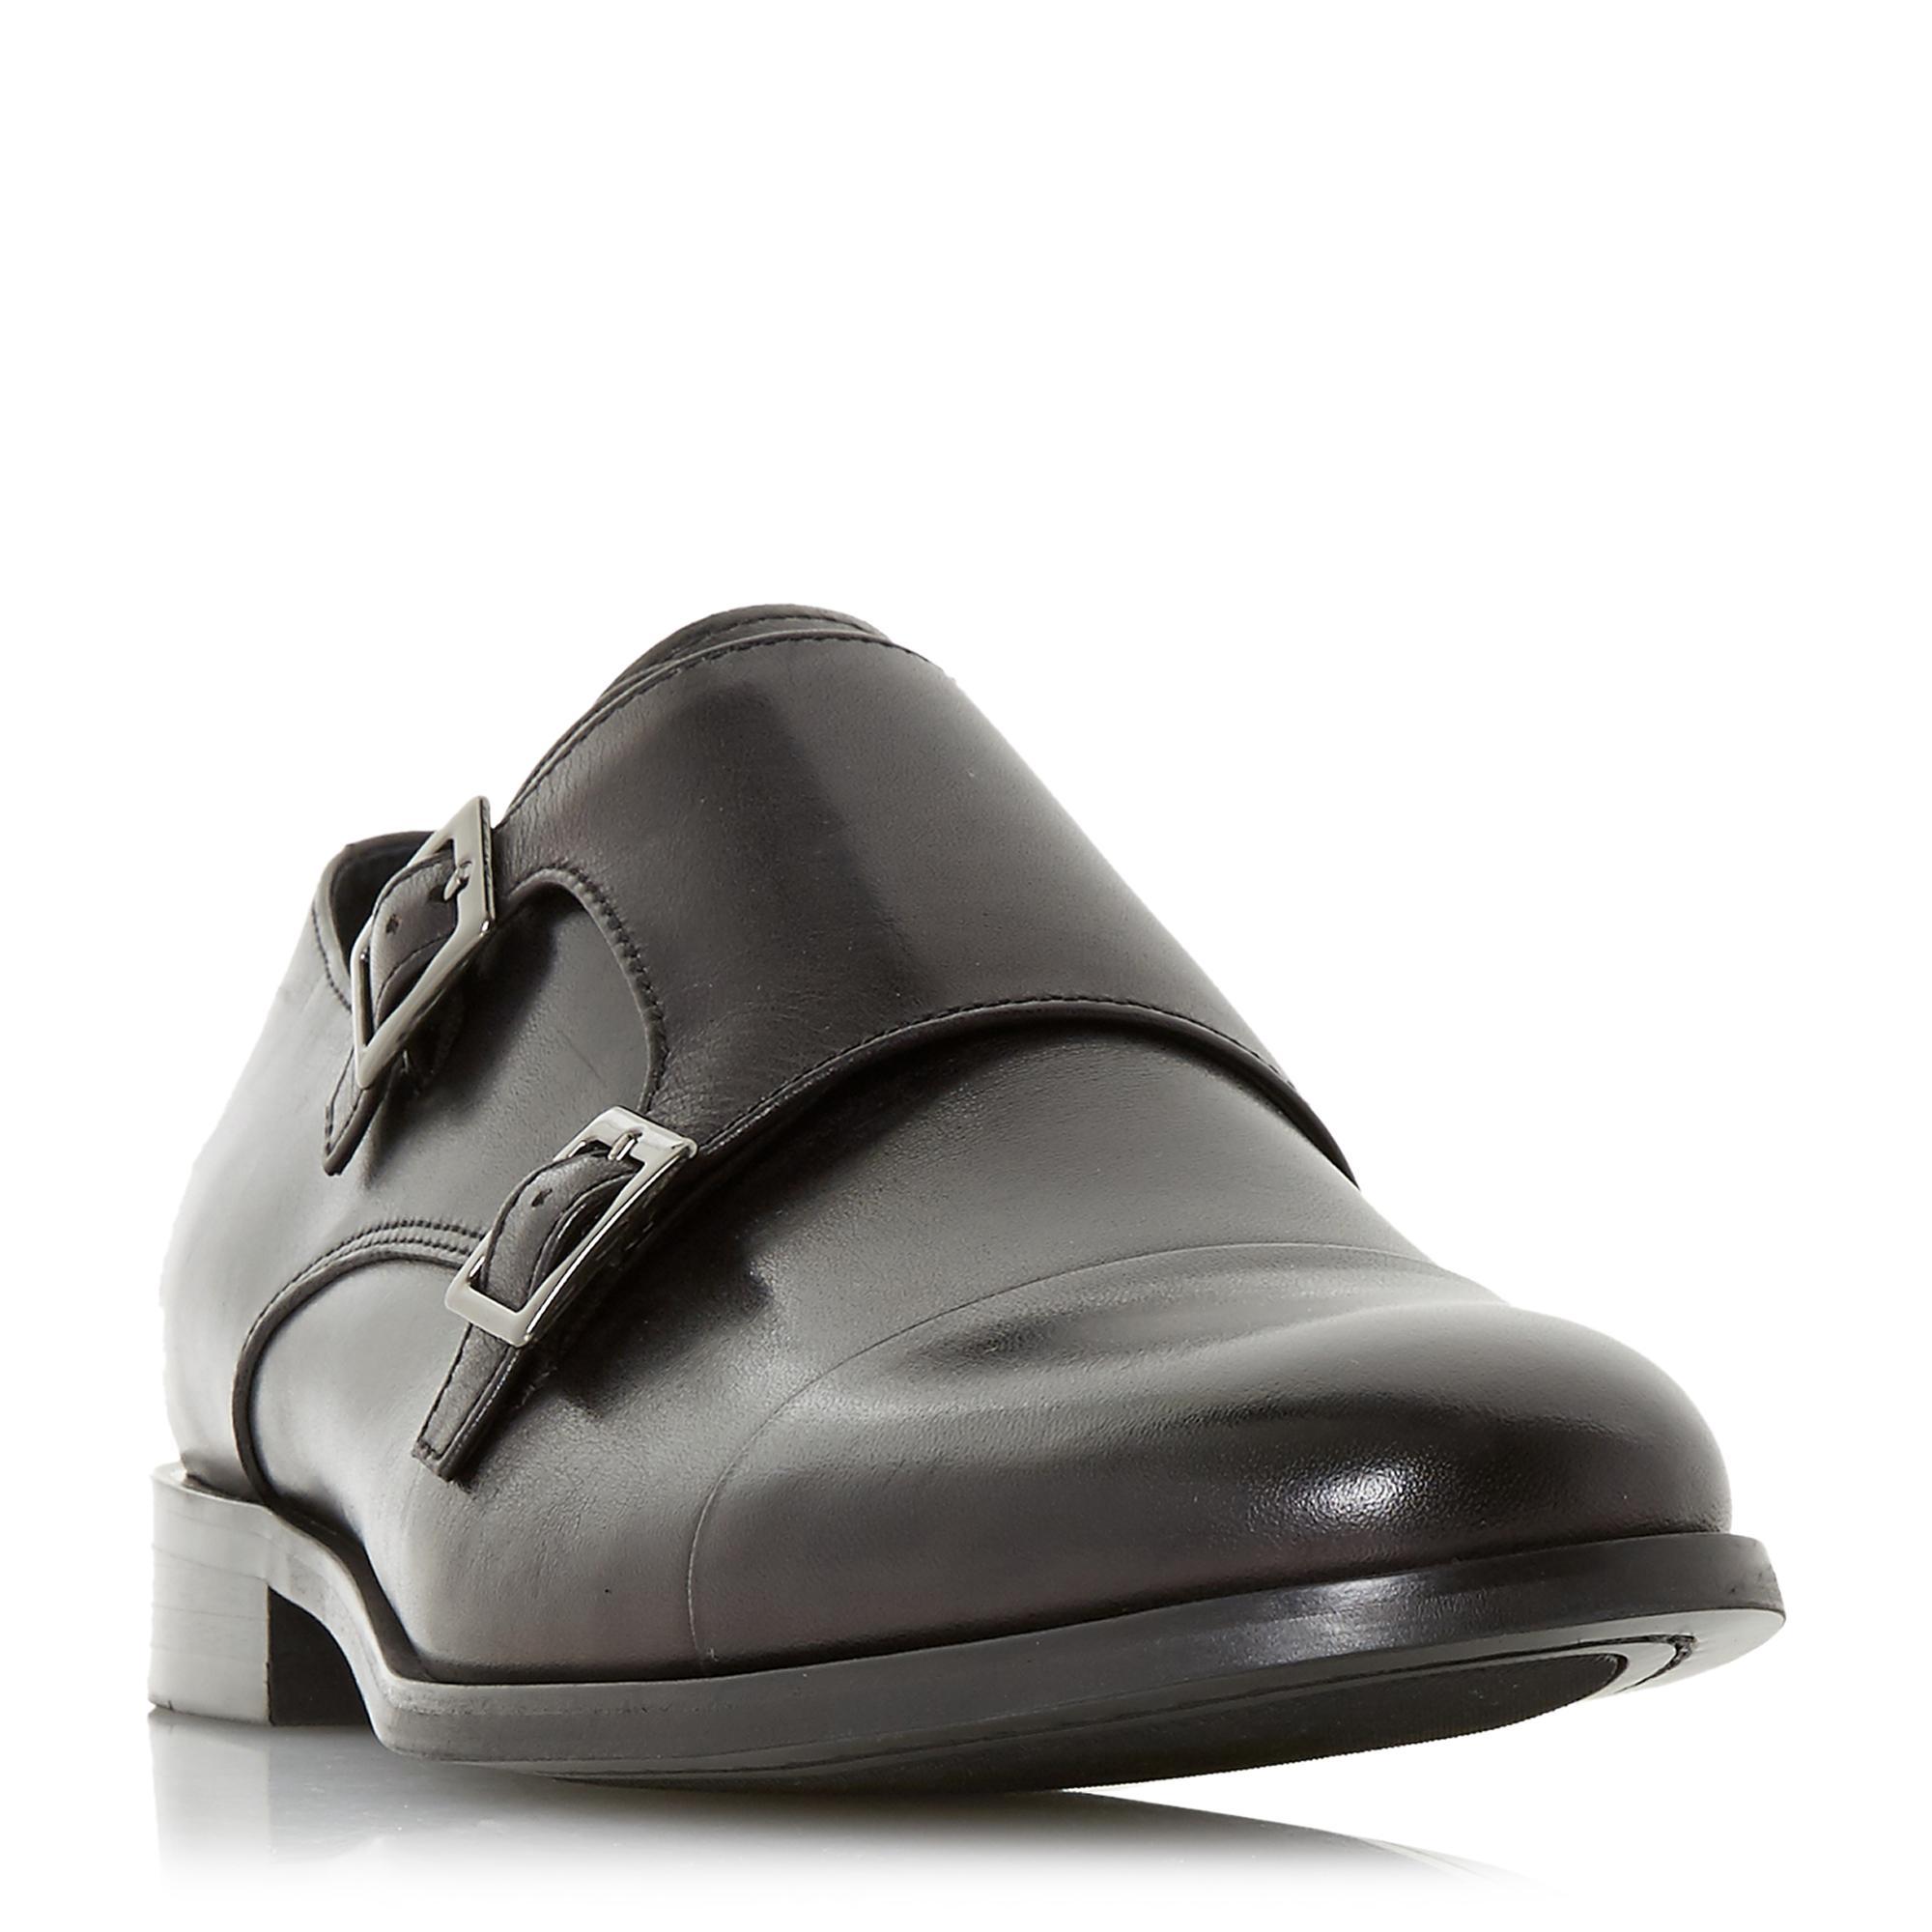 Dune Leather Men's 'prise' Double Buckle Monk Shoes in Black for Men - Lyst